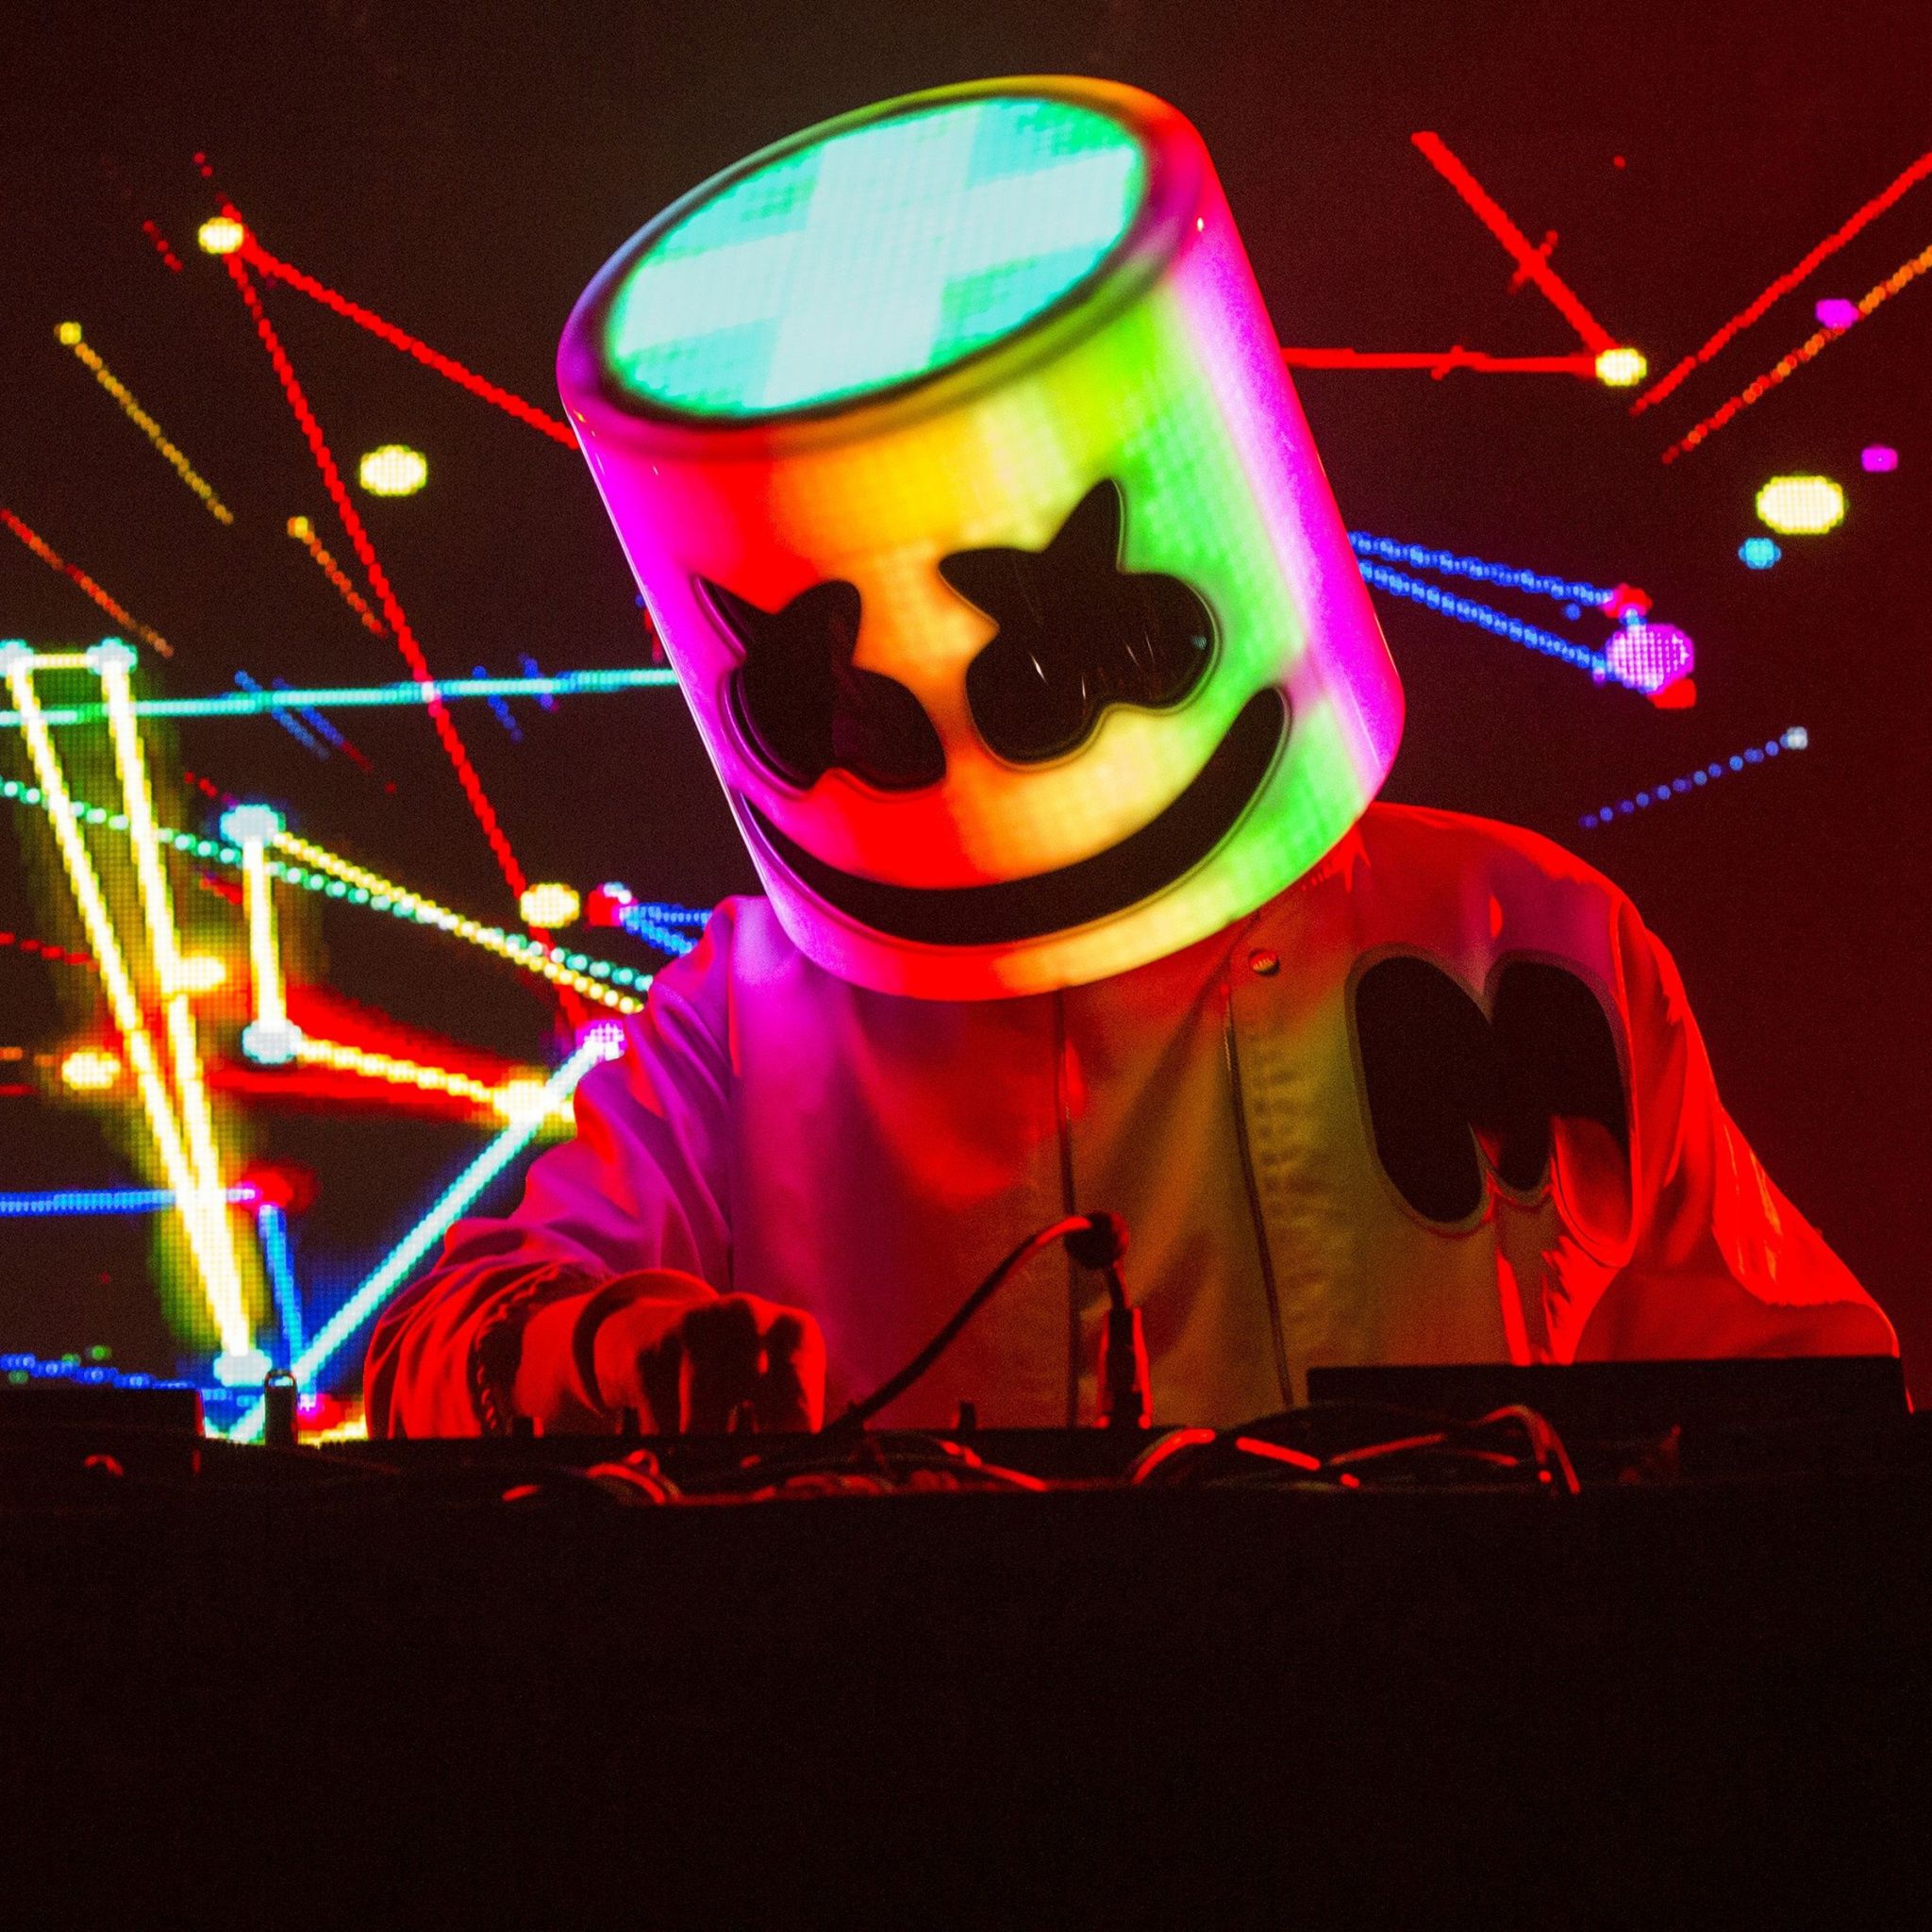 Marshmello is a popular DJ who is known for his large smiley face helmet. - Marshmello